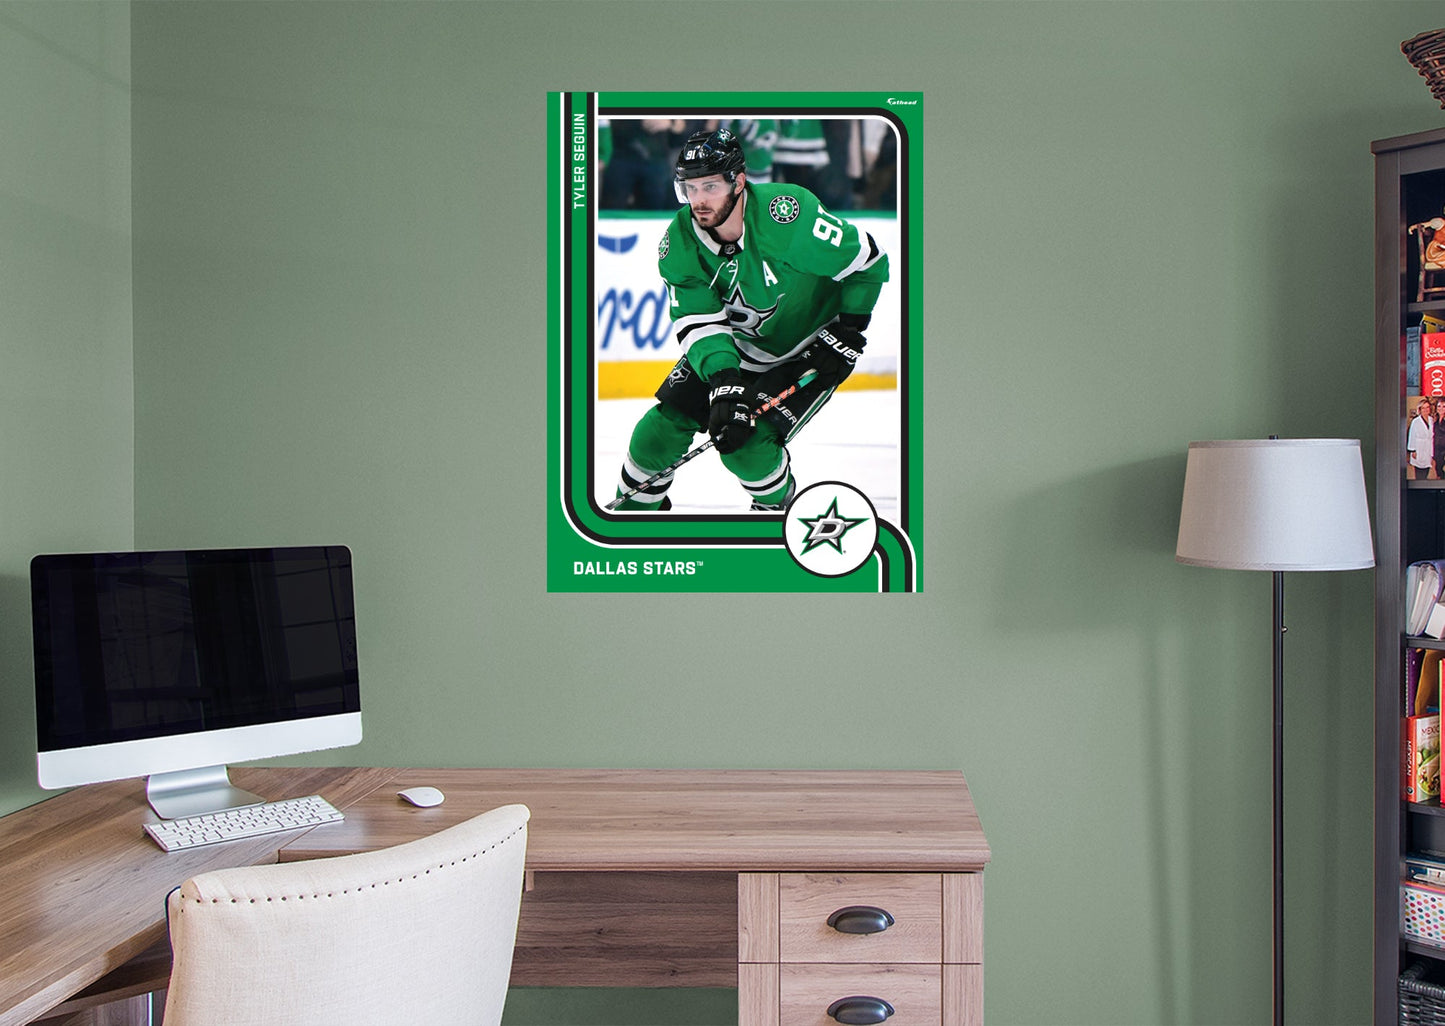 Dallas Stars: Tyler Seguin Poster - Officially Licensed NHL Removable Adhesive Decal